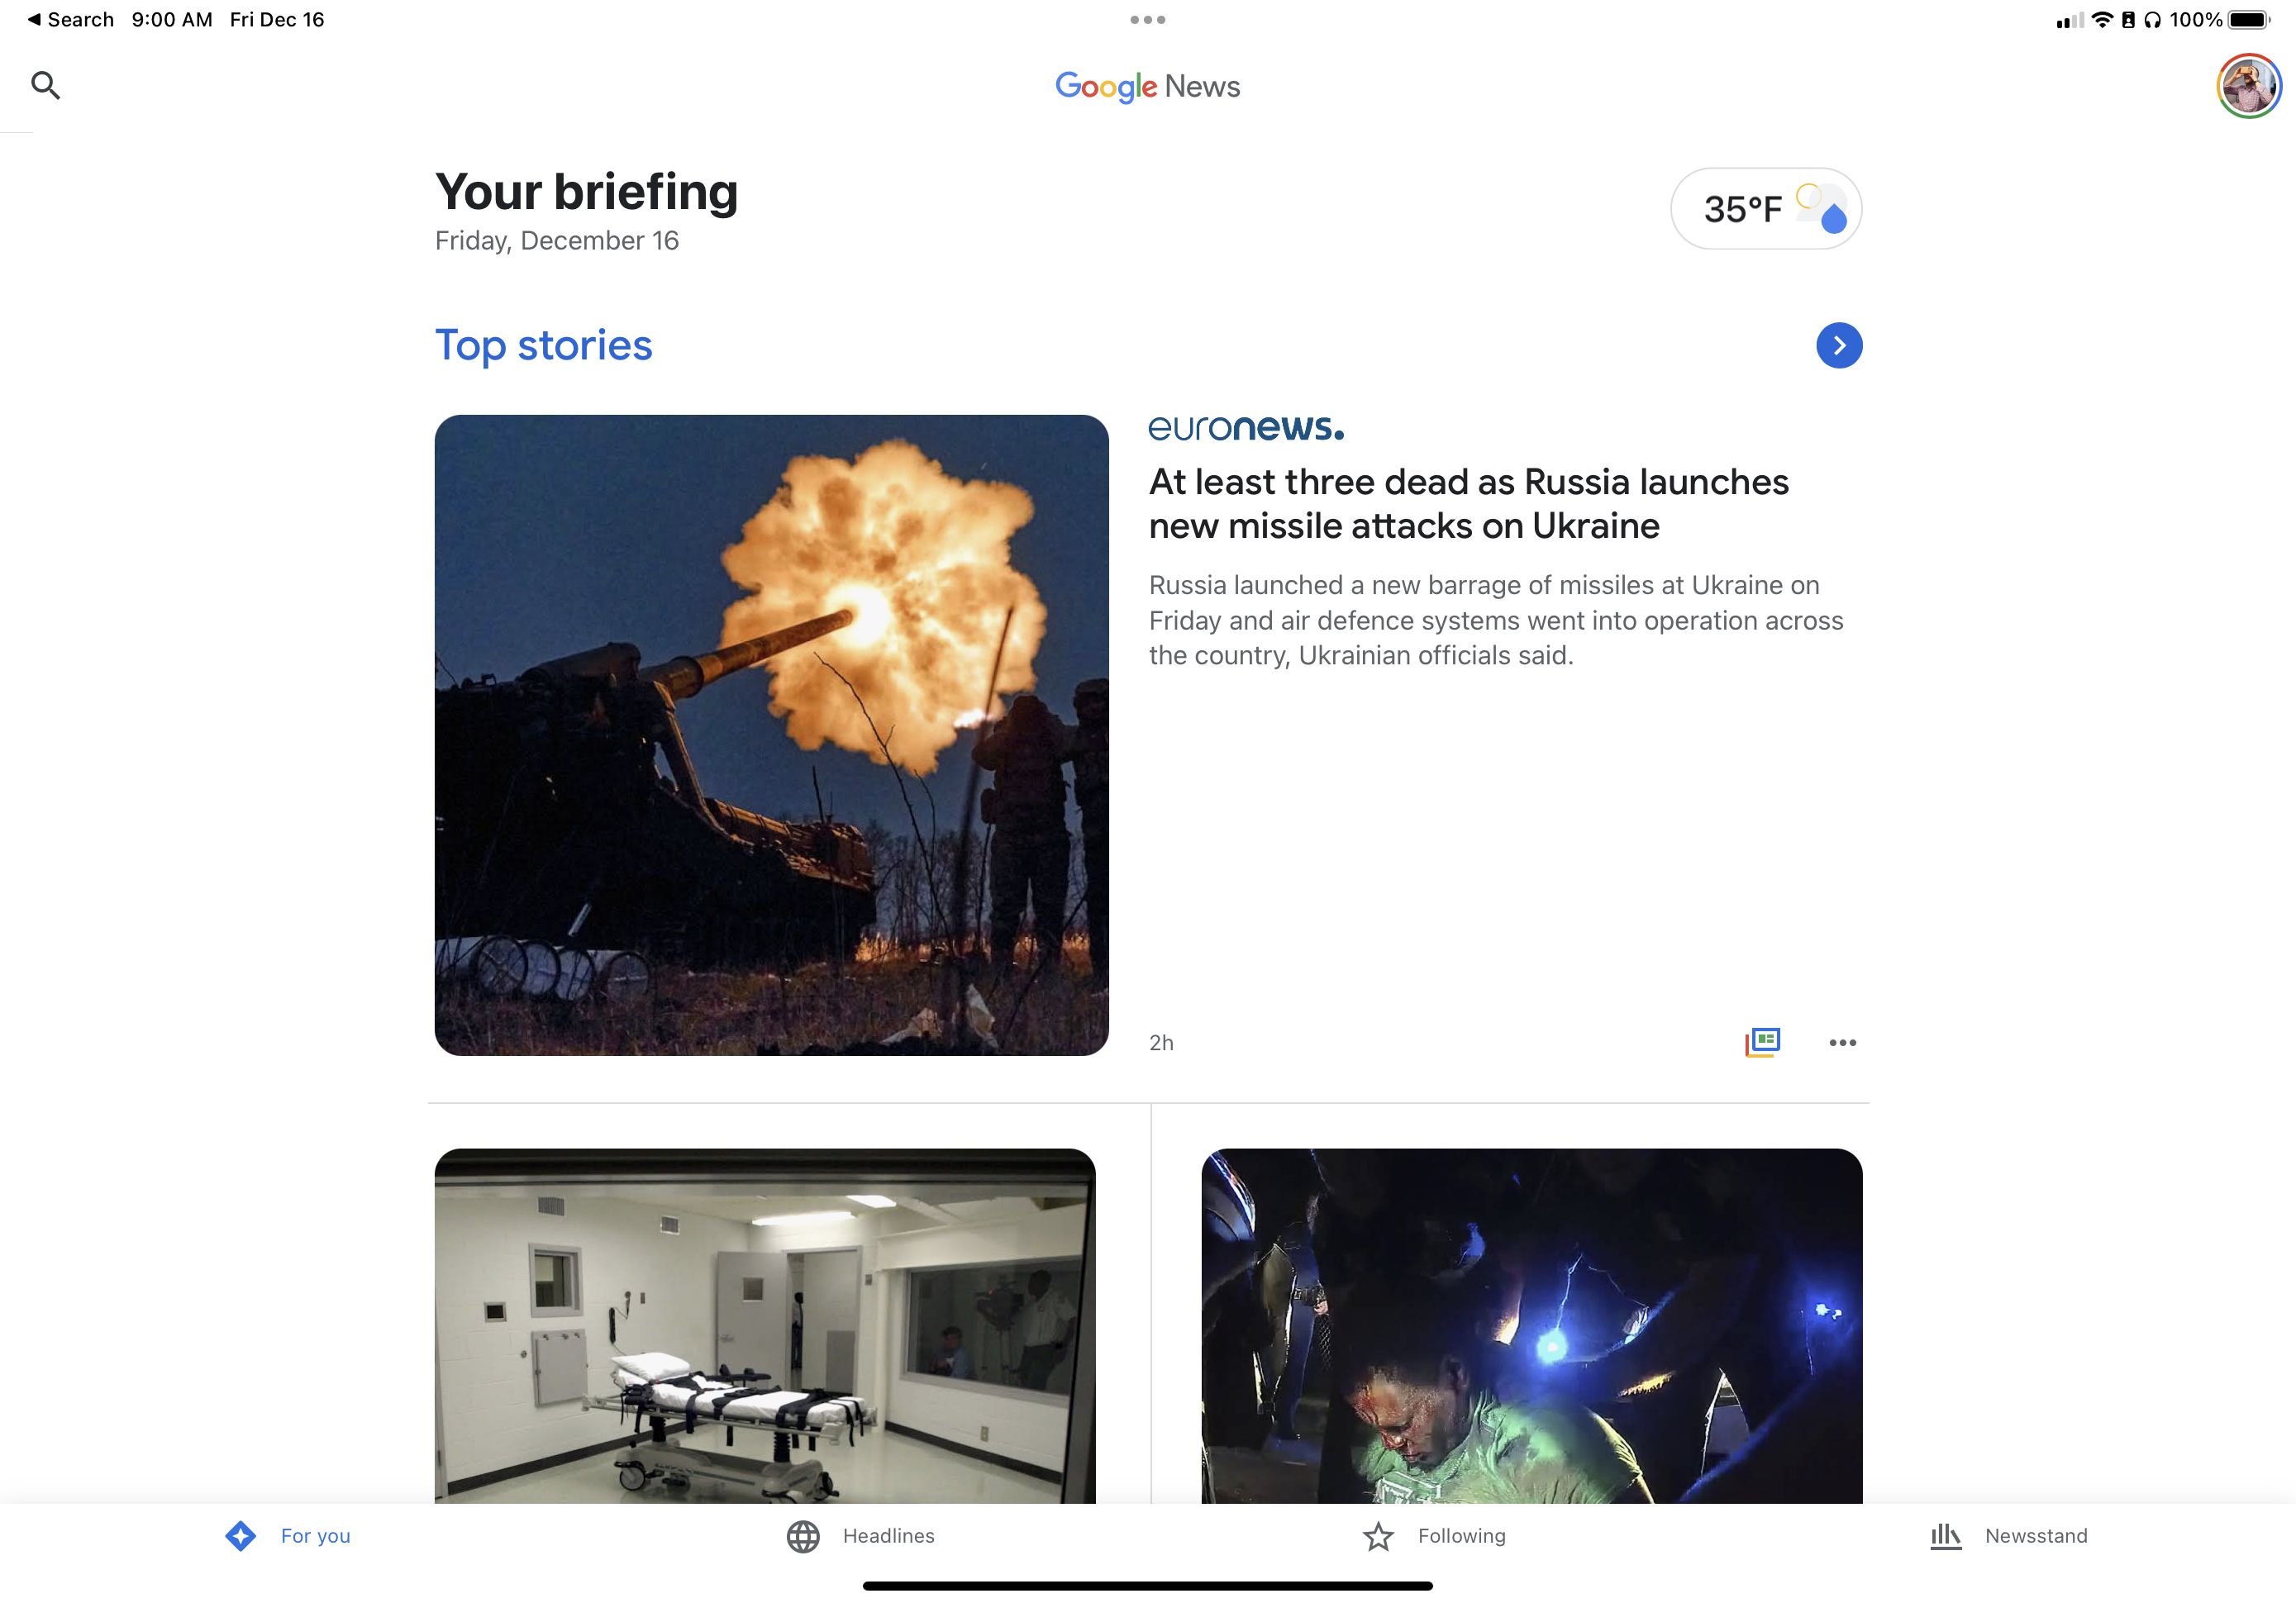 Google News is similar to Apple News but better for shorter blogs and local happenings. It’s also available in more places.